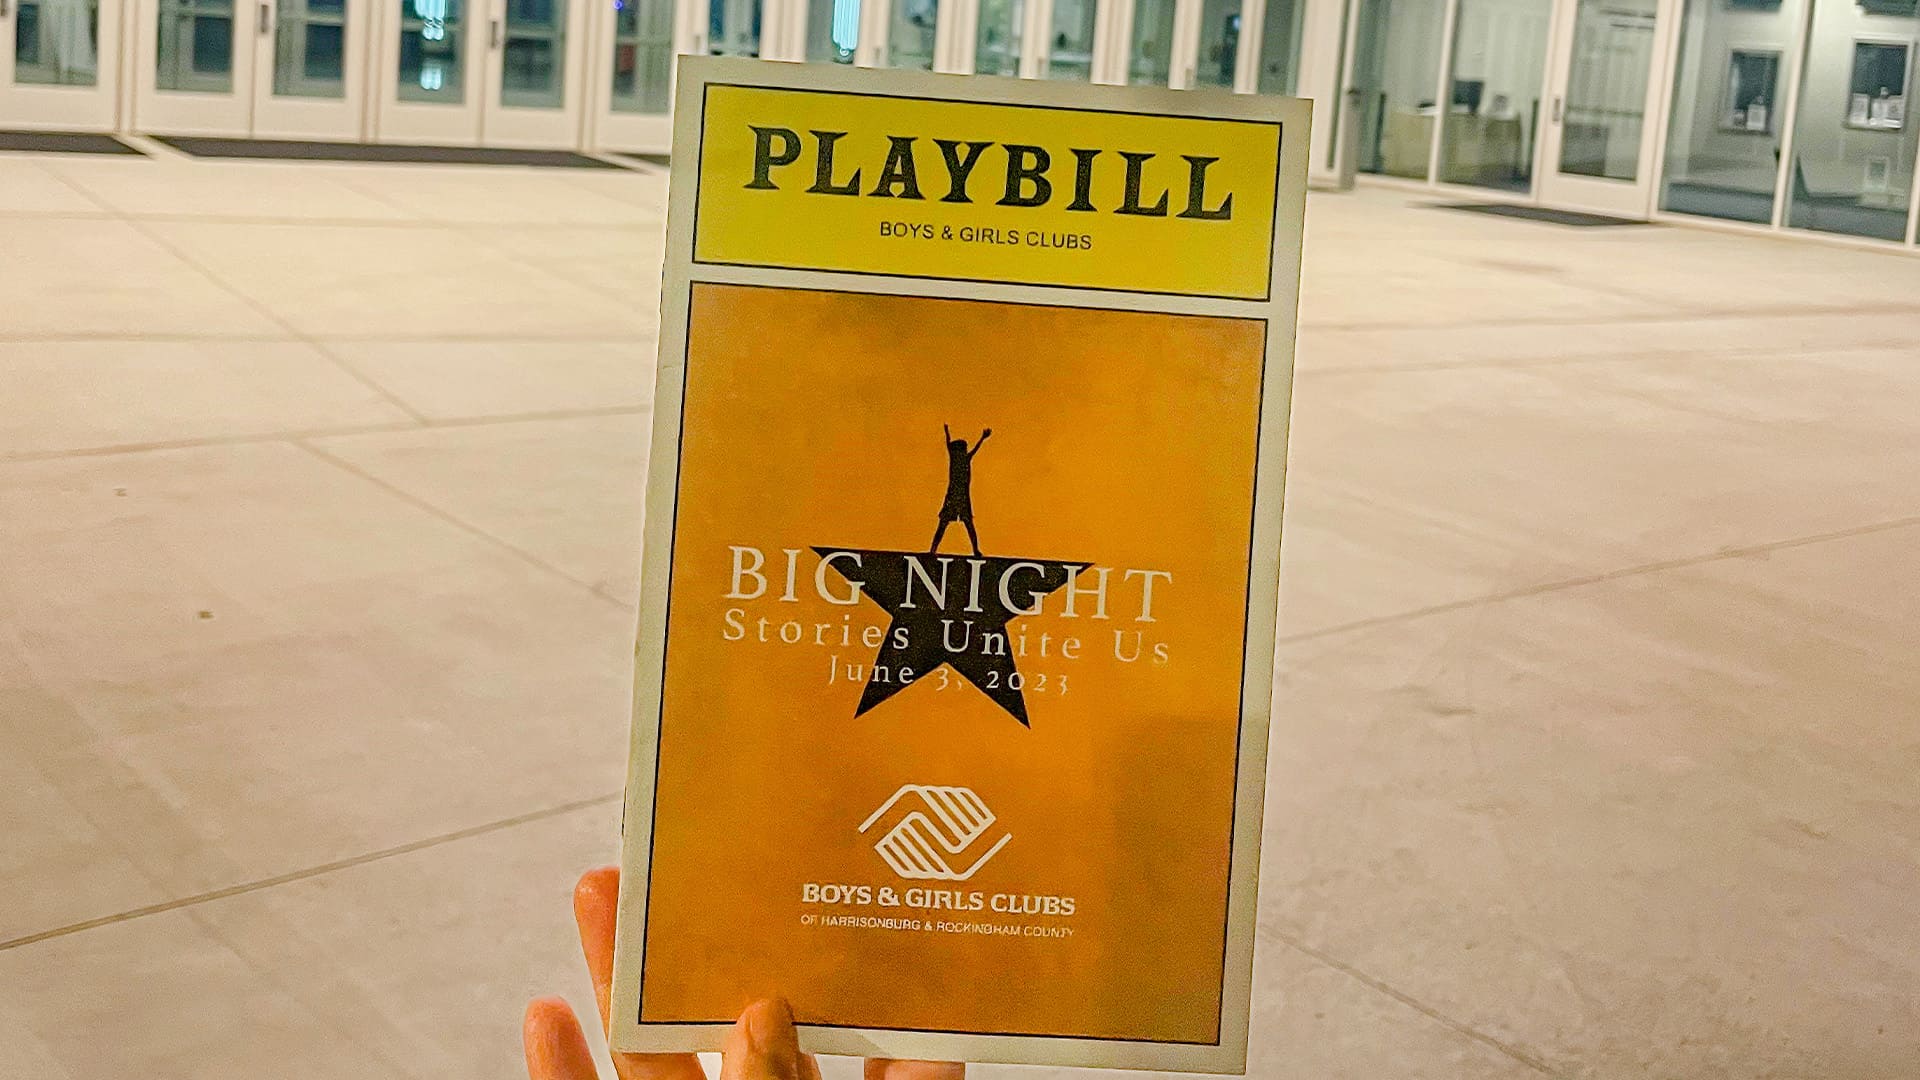 Playbill for the Big Night for the Boys and Girls Club